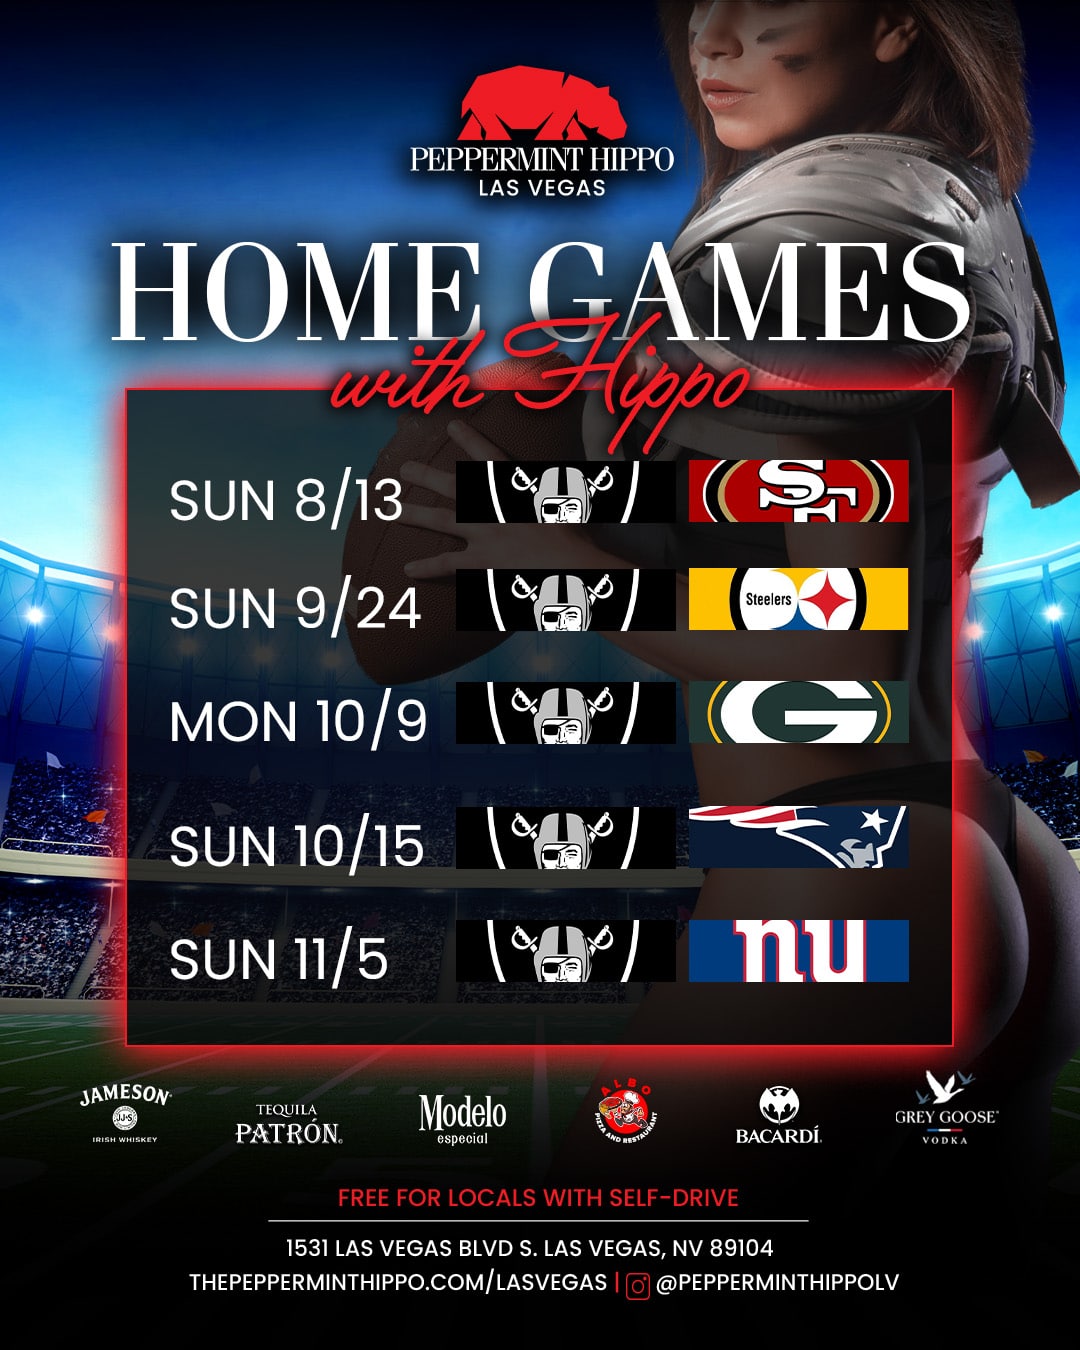 Home Games Football at Peppermint Hippo Las Vegas